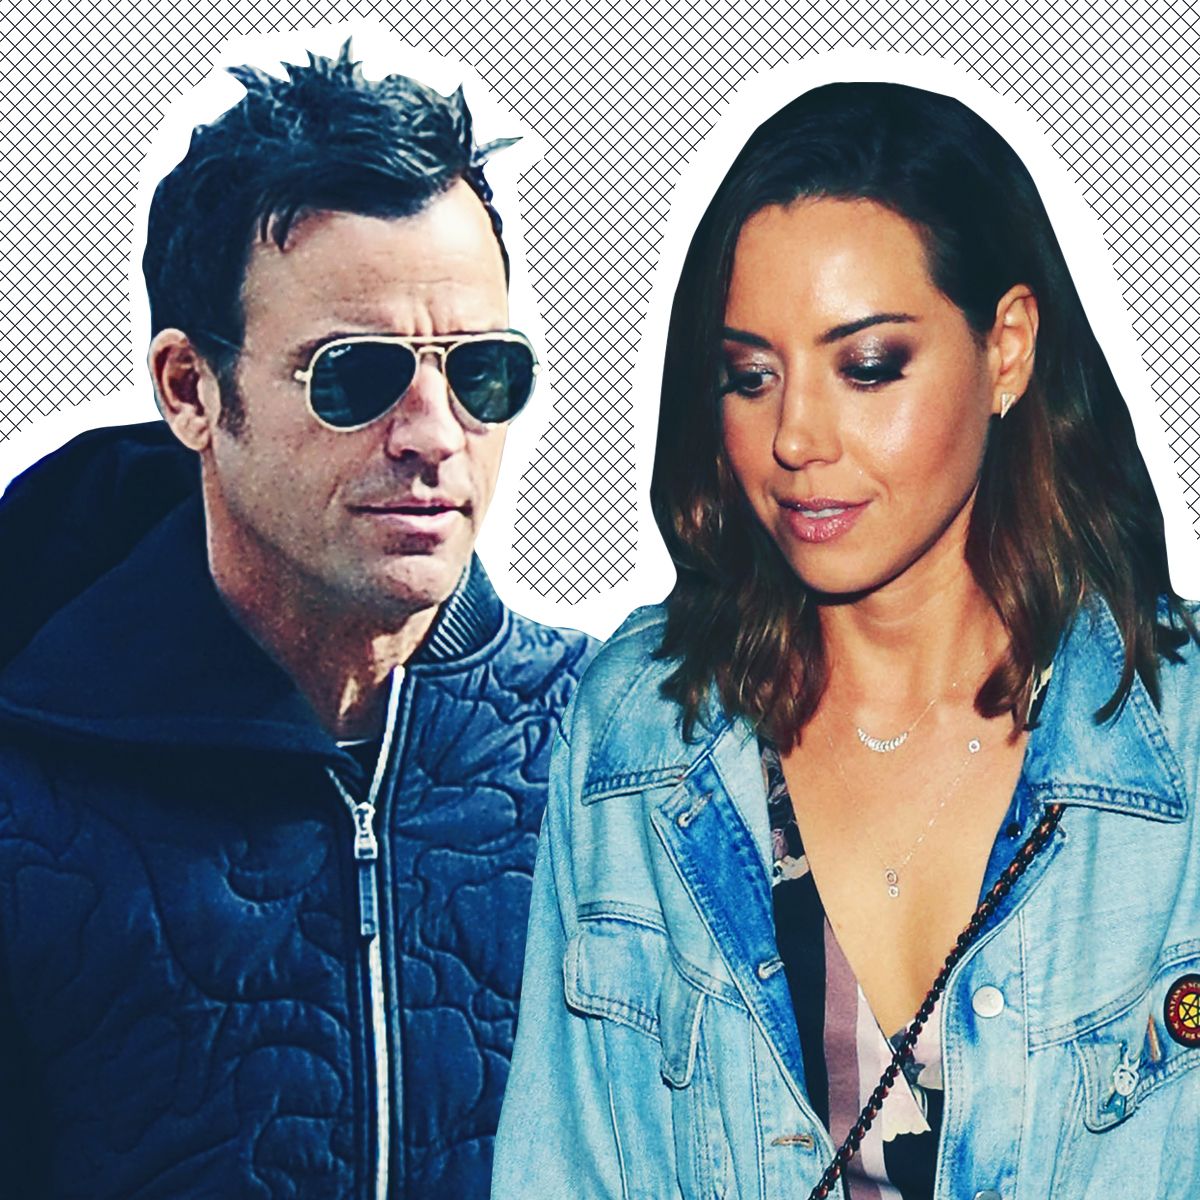 Jennifer Aniston's ex Justin Theroux 'just friends' with actress Aubrey  Plaza after being pictured together at his New York apartment a month after  split